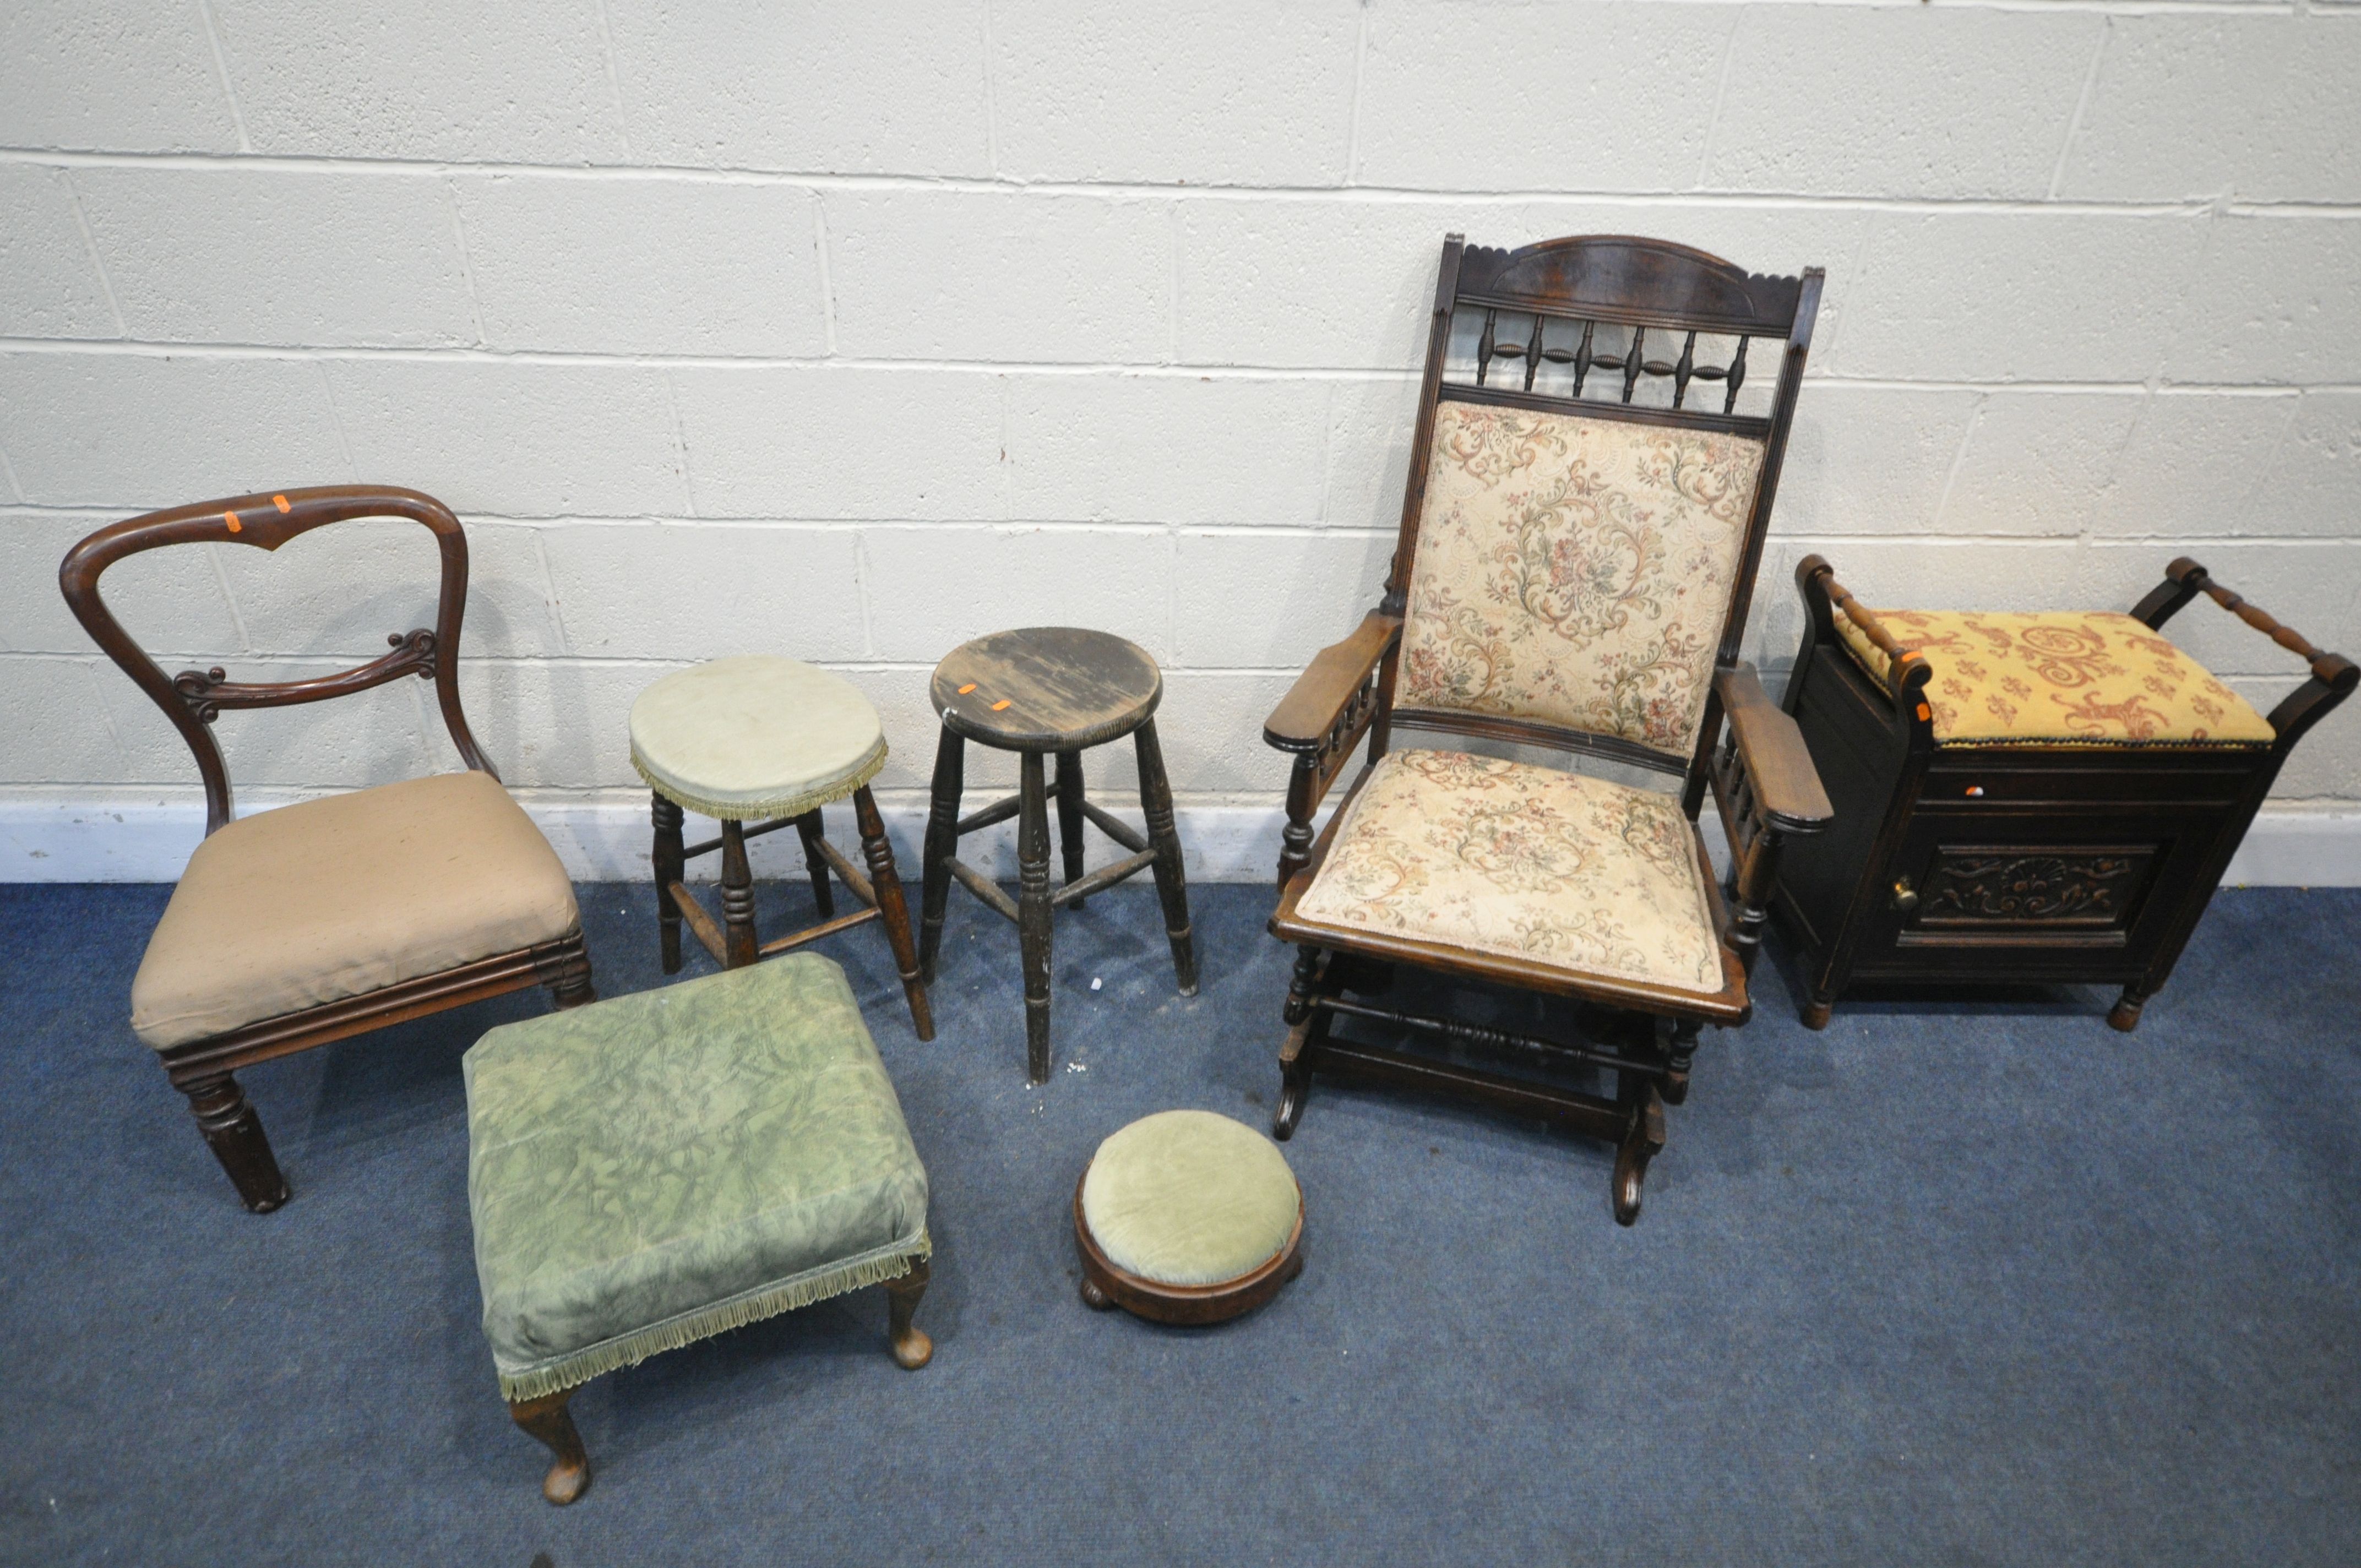 A SELECTION OF CHAIRS AND STOOLS, to include an Edwardian American rocking chair, an Edwardian piano